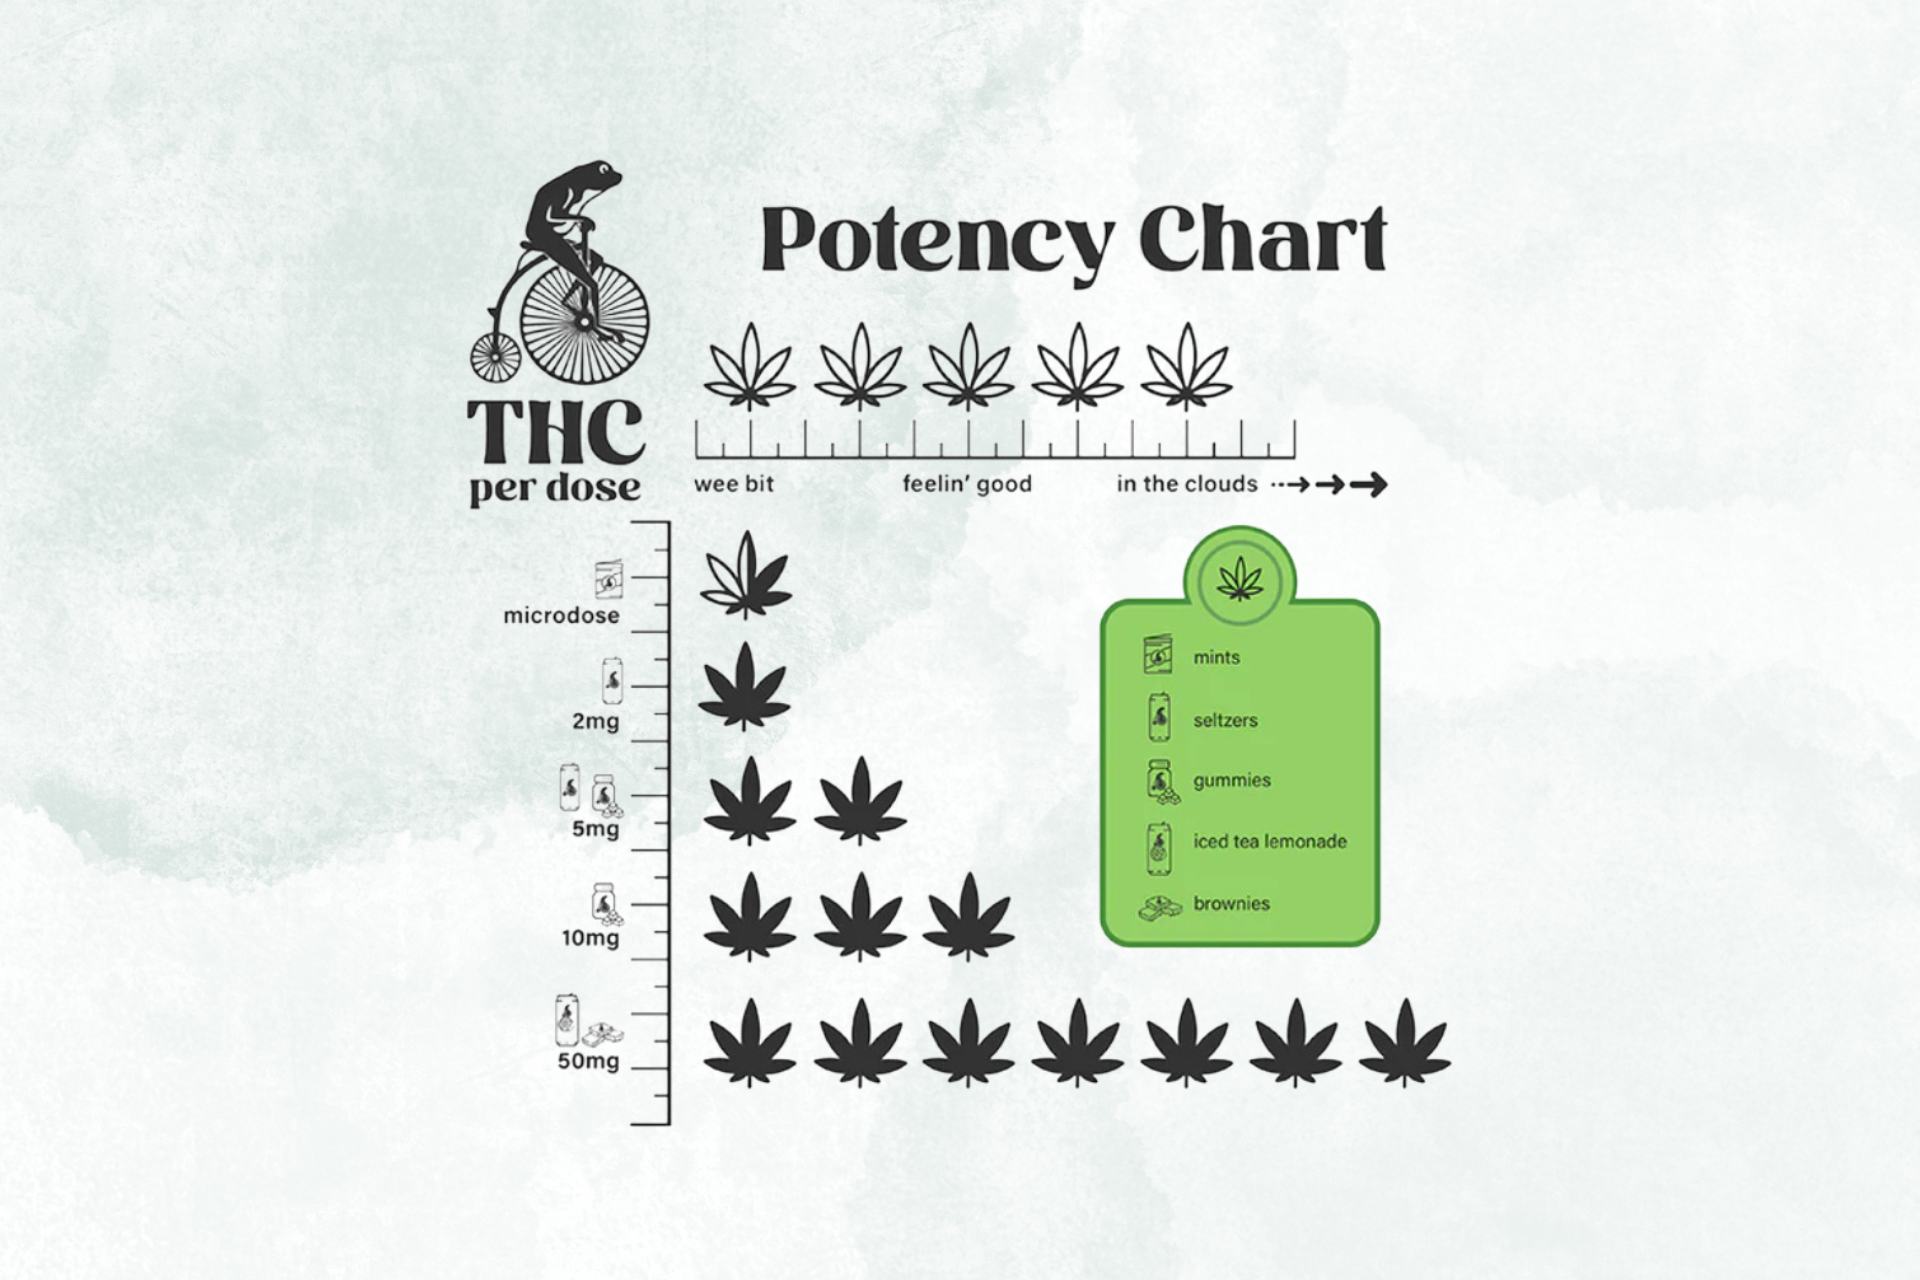 Let's Talk About Potency: A Guide to Cycling Frog's Potency Levels